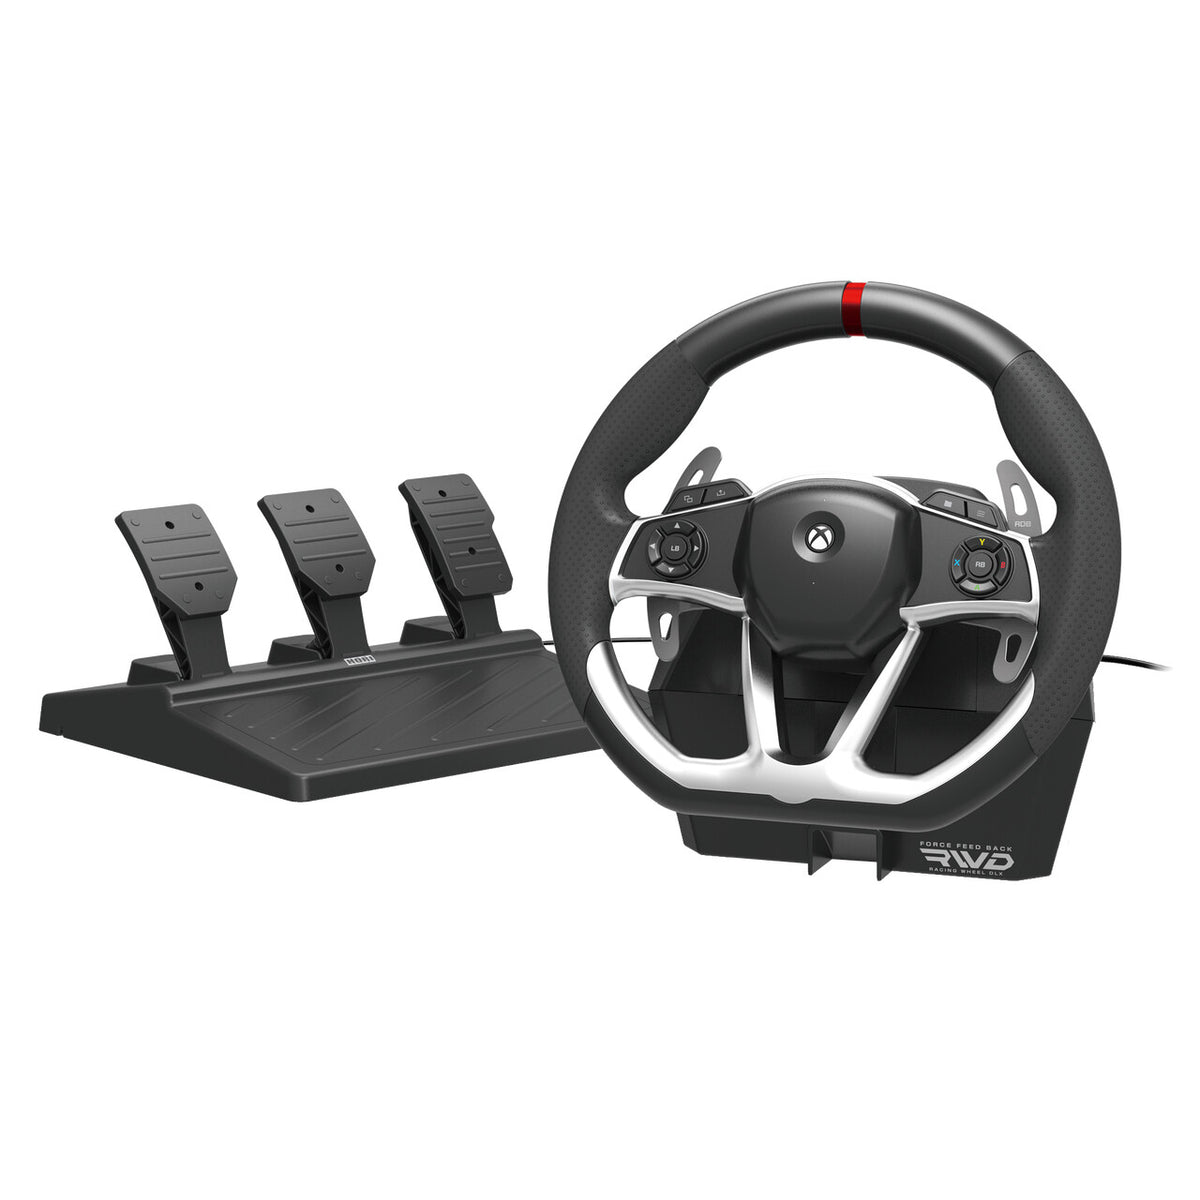 Hori Force Feedback Racing Wheel DLX - USB Steering wheel + Pedals for Xbox Series X|S